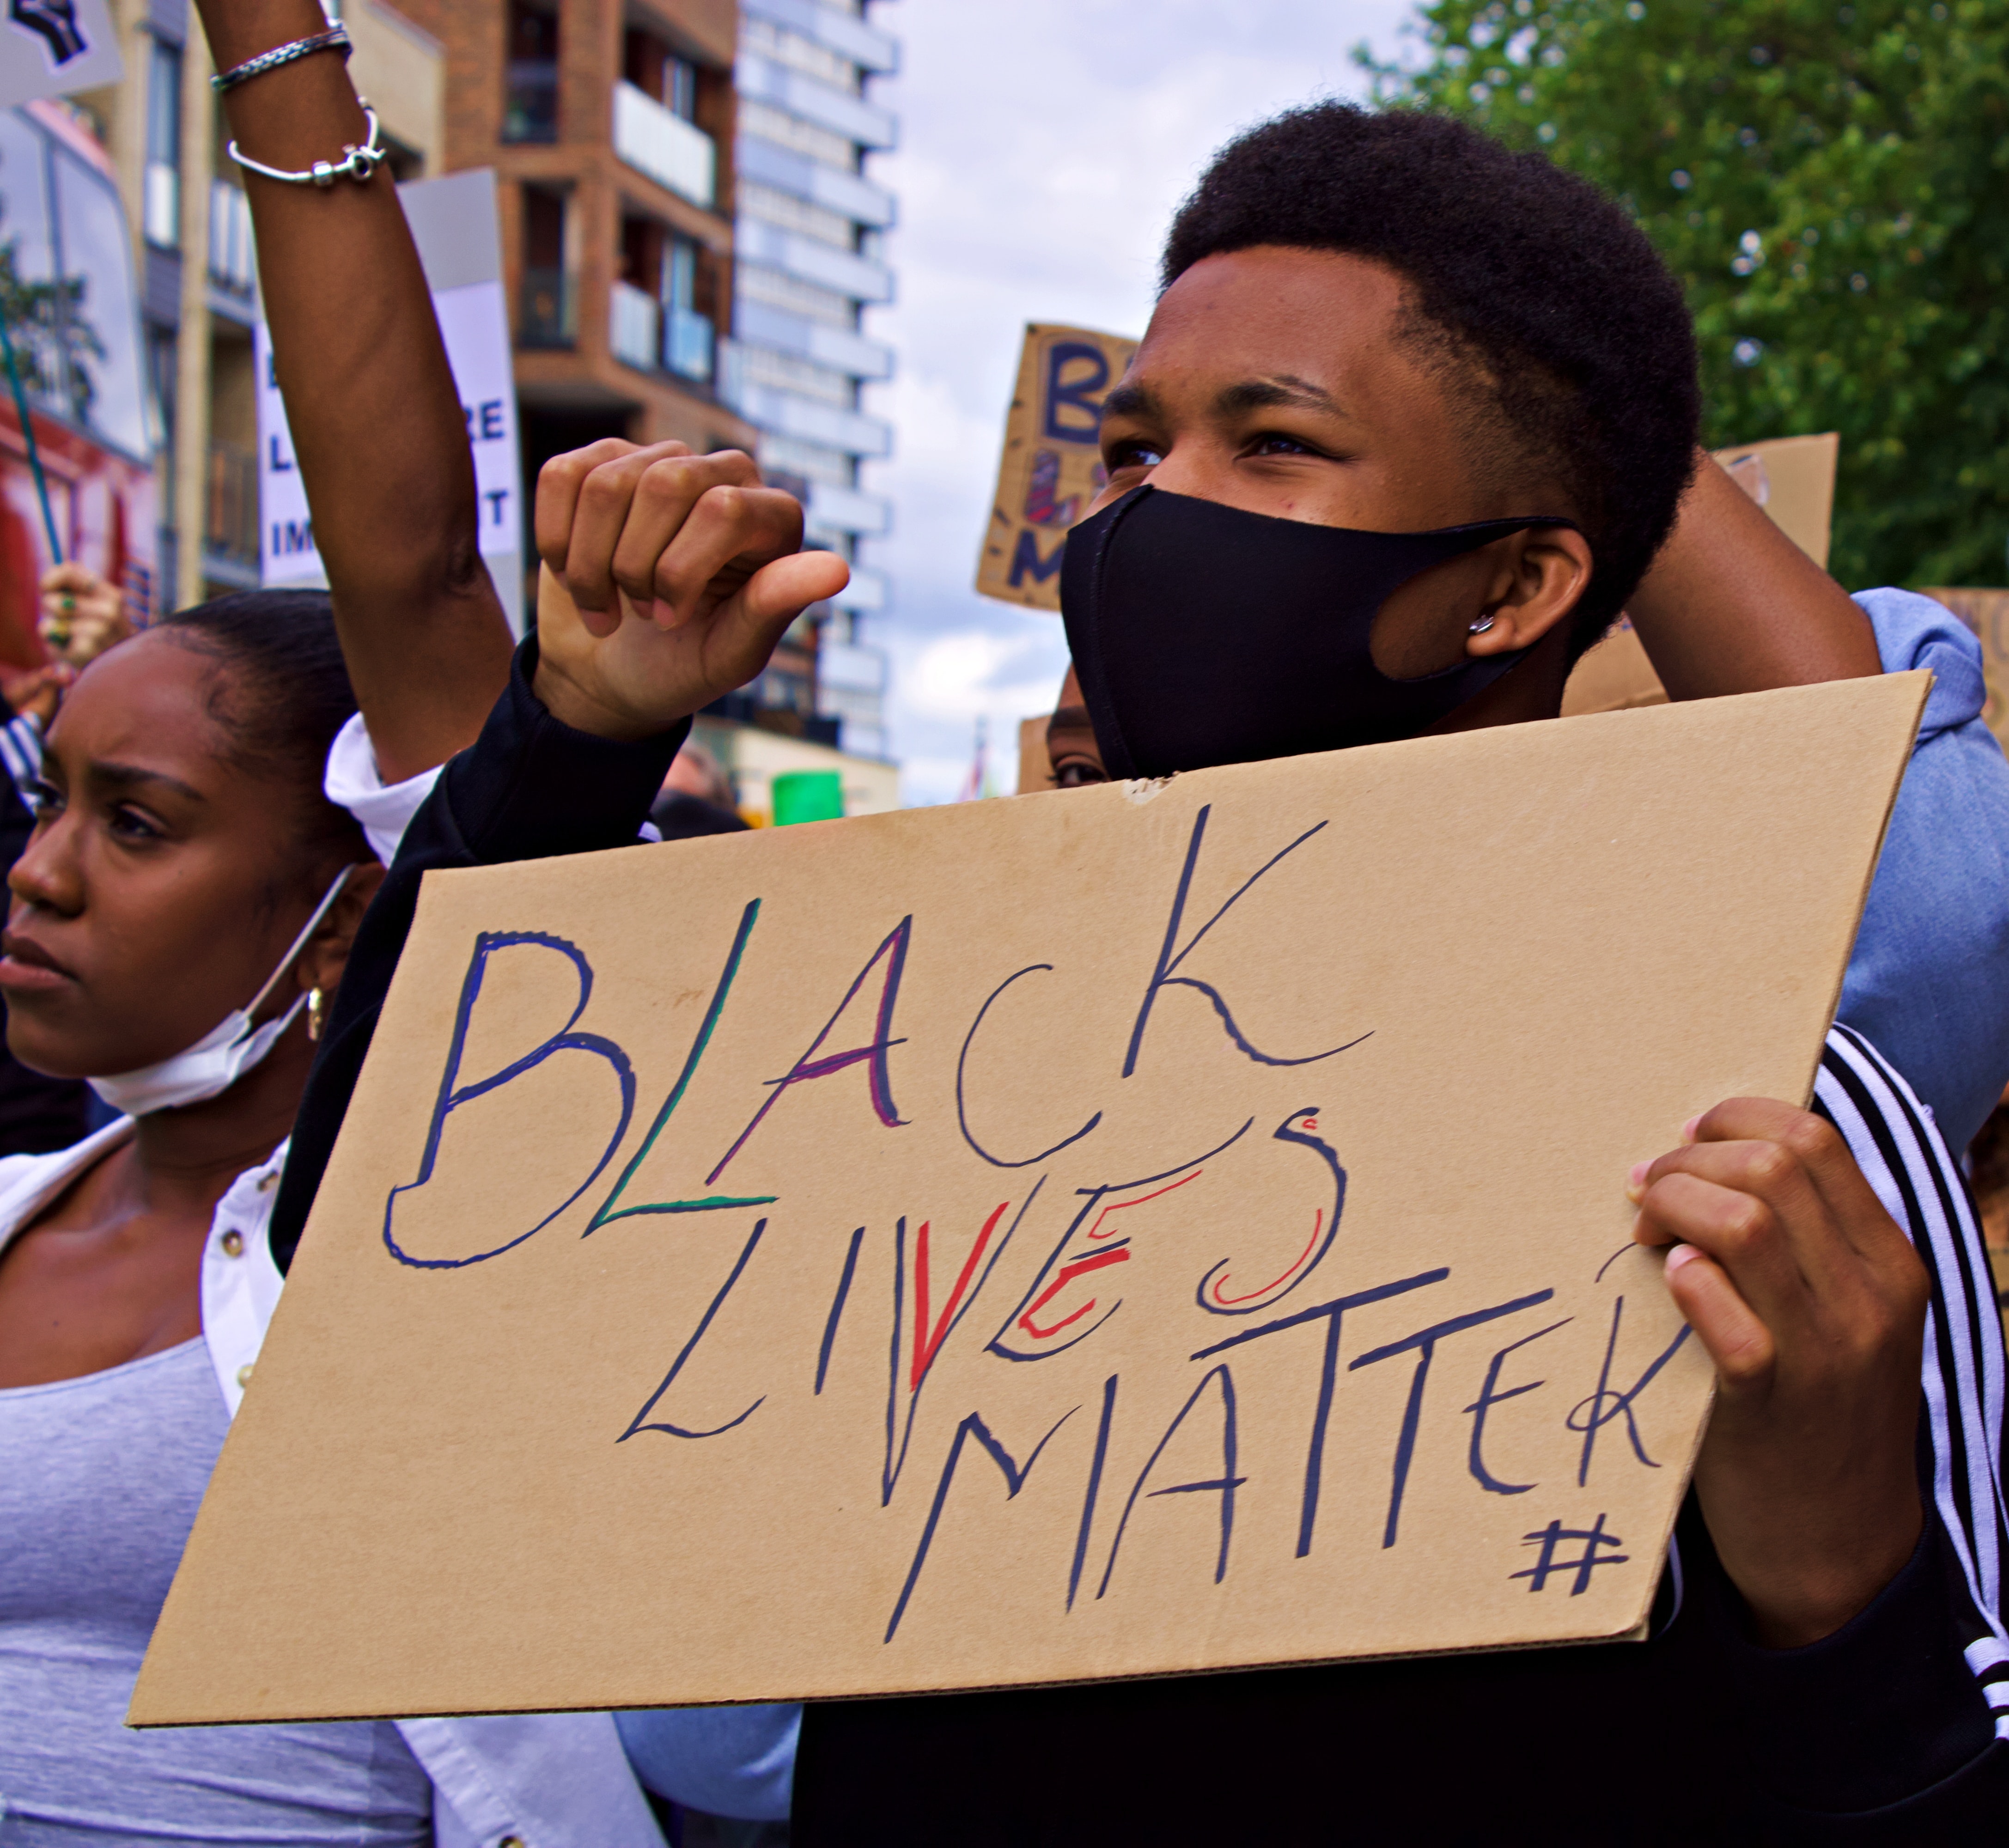 Young Black man wearing a face mask and holding a cardboard sign that says "Black Lives Matter" at an outdoor public demonstration